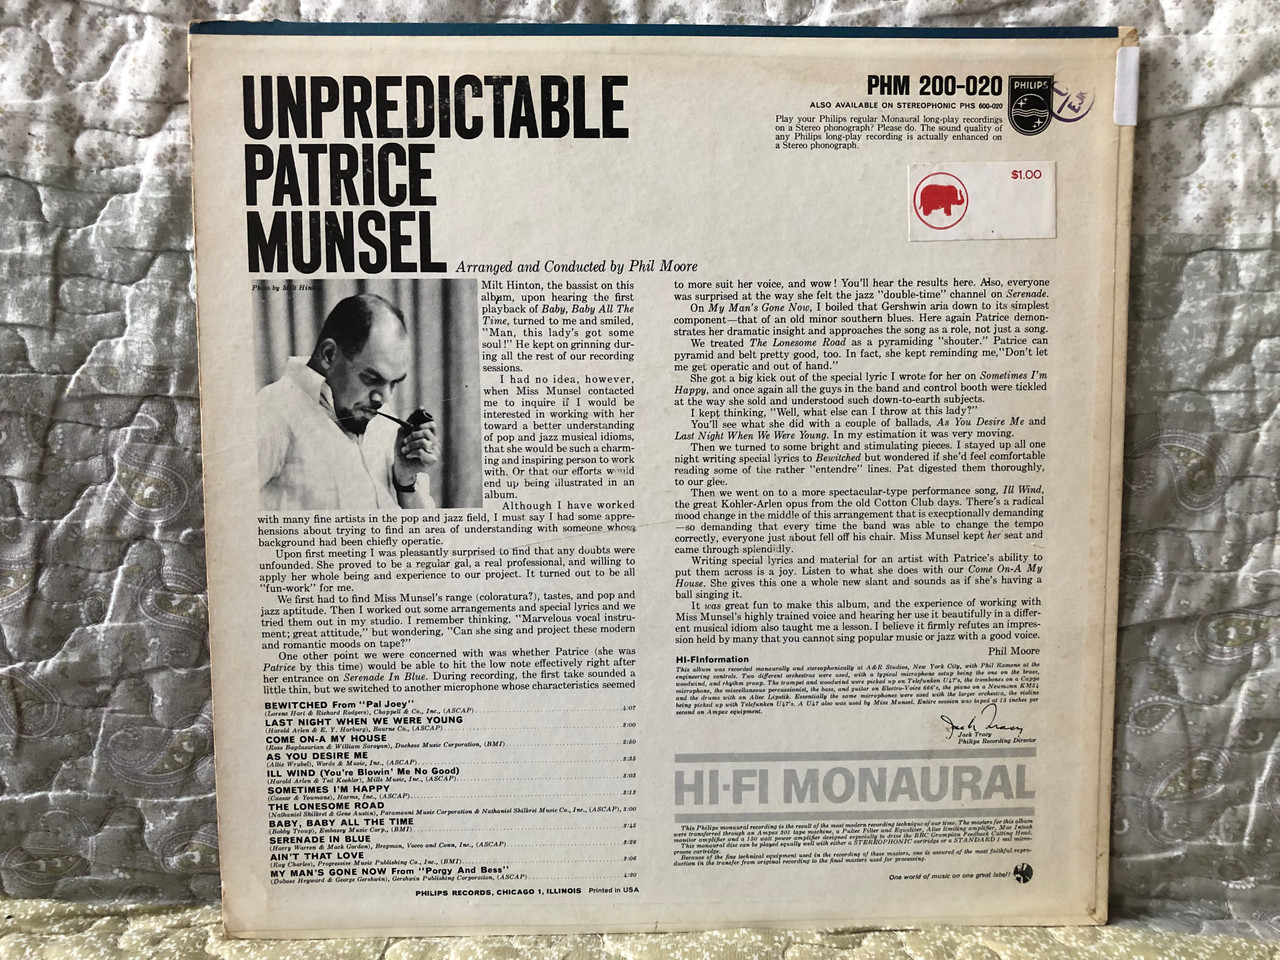 https://cdn10.bigcommerce.com/s-62bdpkt7pb/products/0/images/275058/Unpredictable_-_Patrice_Munsel_With_Phil_Moore_Orchestra_Sometimes_Im_Happy_As_You_Desire_Me_Come_On-a_My_House_My_Mans_Gone_Now_Baby_Baby_All_The_Time_Serenade_In_Blue_Bewitched_Philips_LP_P__60906.1684760492.1280.1280.JPG?c=2&_gl=1*1vw9rpc*_ga*MjA2NTIxMjE2MC4xNTkwNTEyNTMy*_ga_WS2VZYPC6G*MTY4NDc1NjcwNy45MDUuMS4xNjg0NzYwMjc3LjYwLjAuMA..